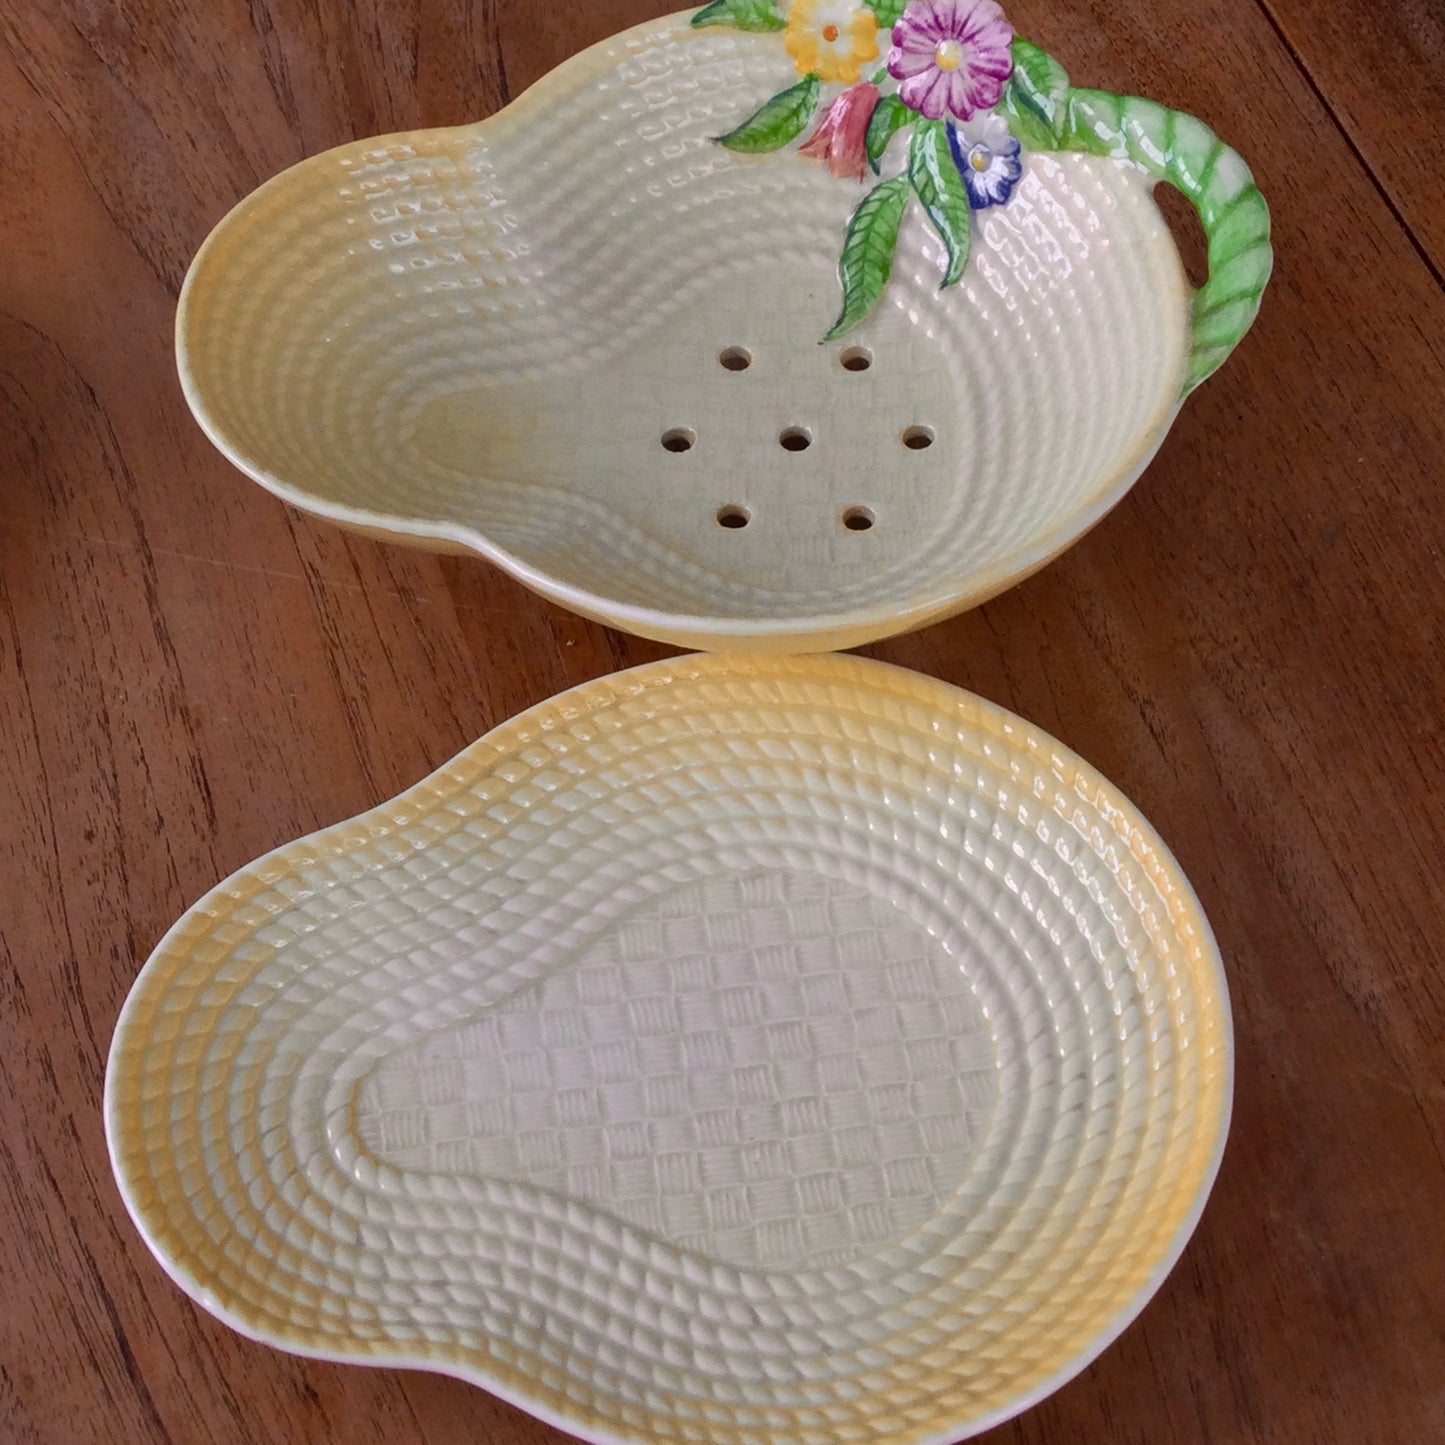 Vintage 1930s Carlton Ware Salad Strainer and Saucer. Yellow basket weave design with Spring flowers